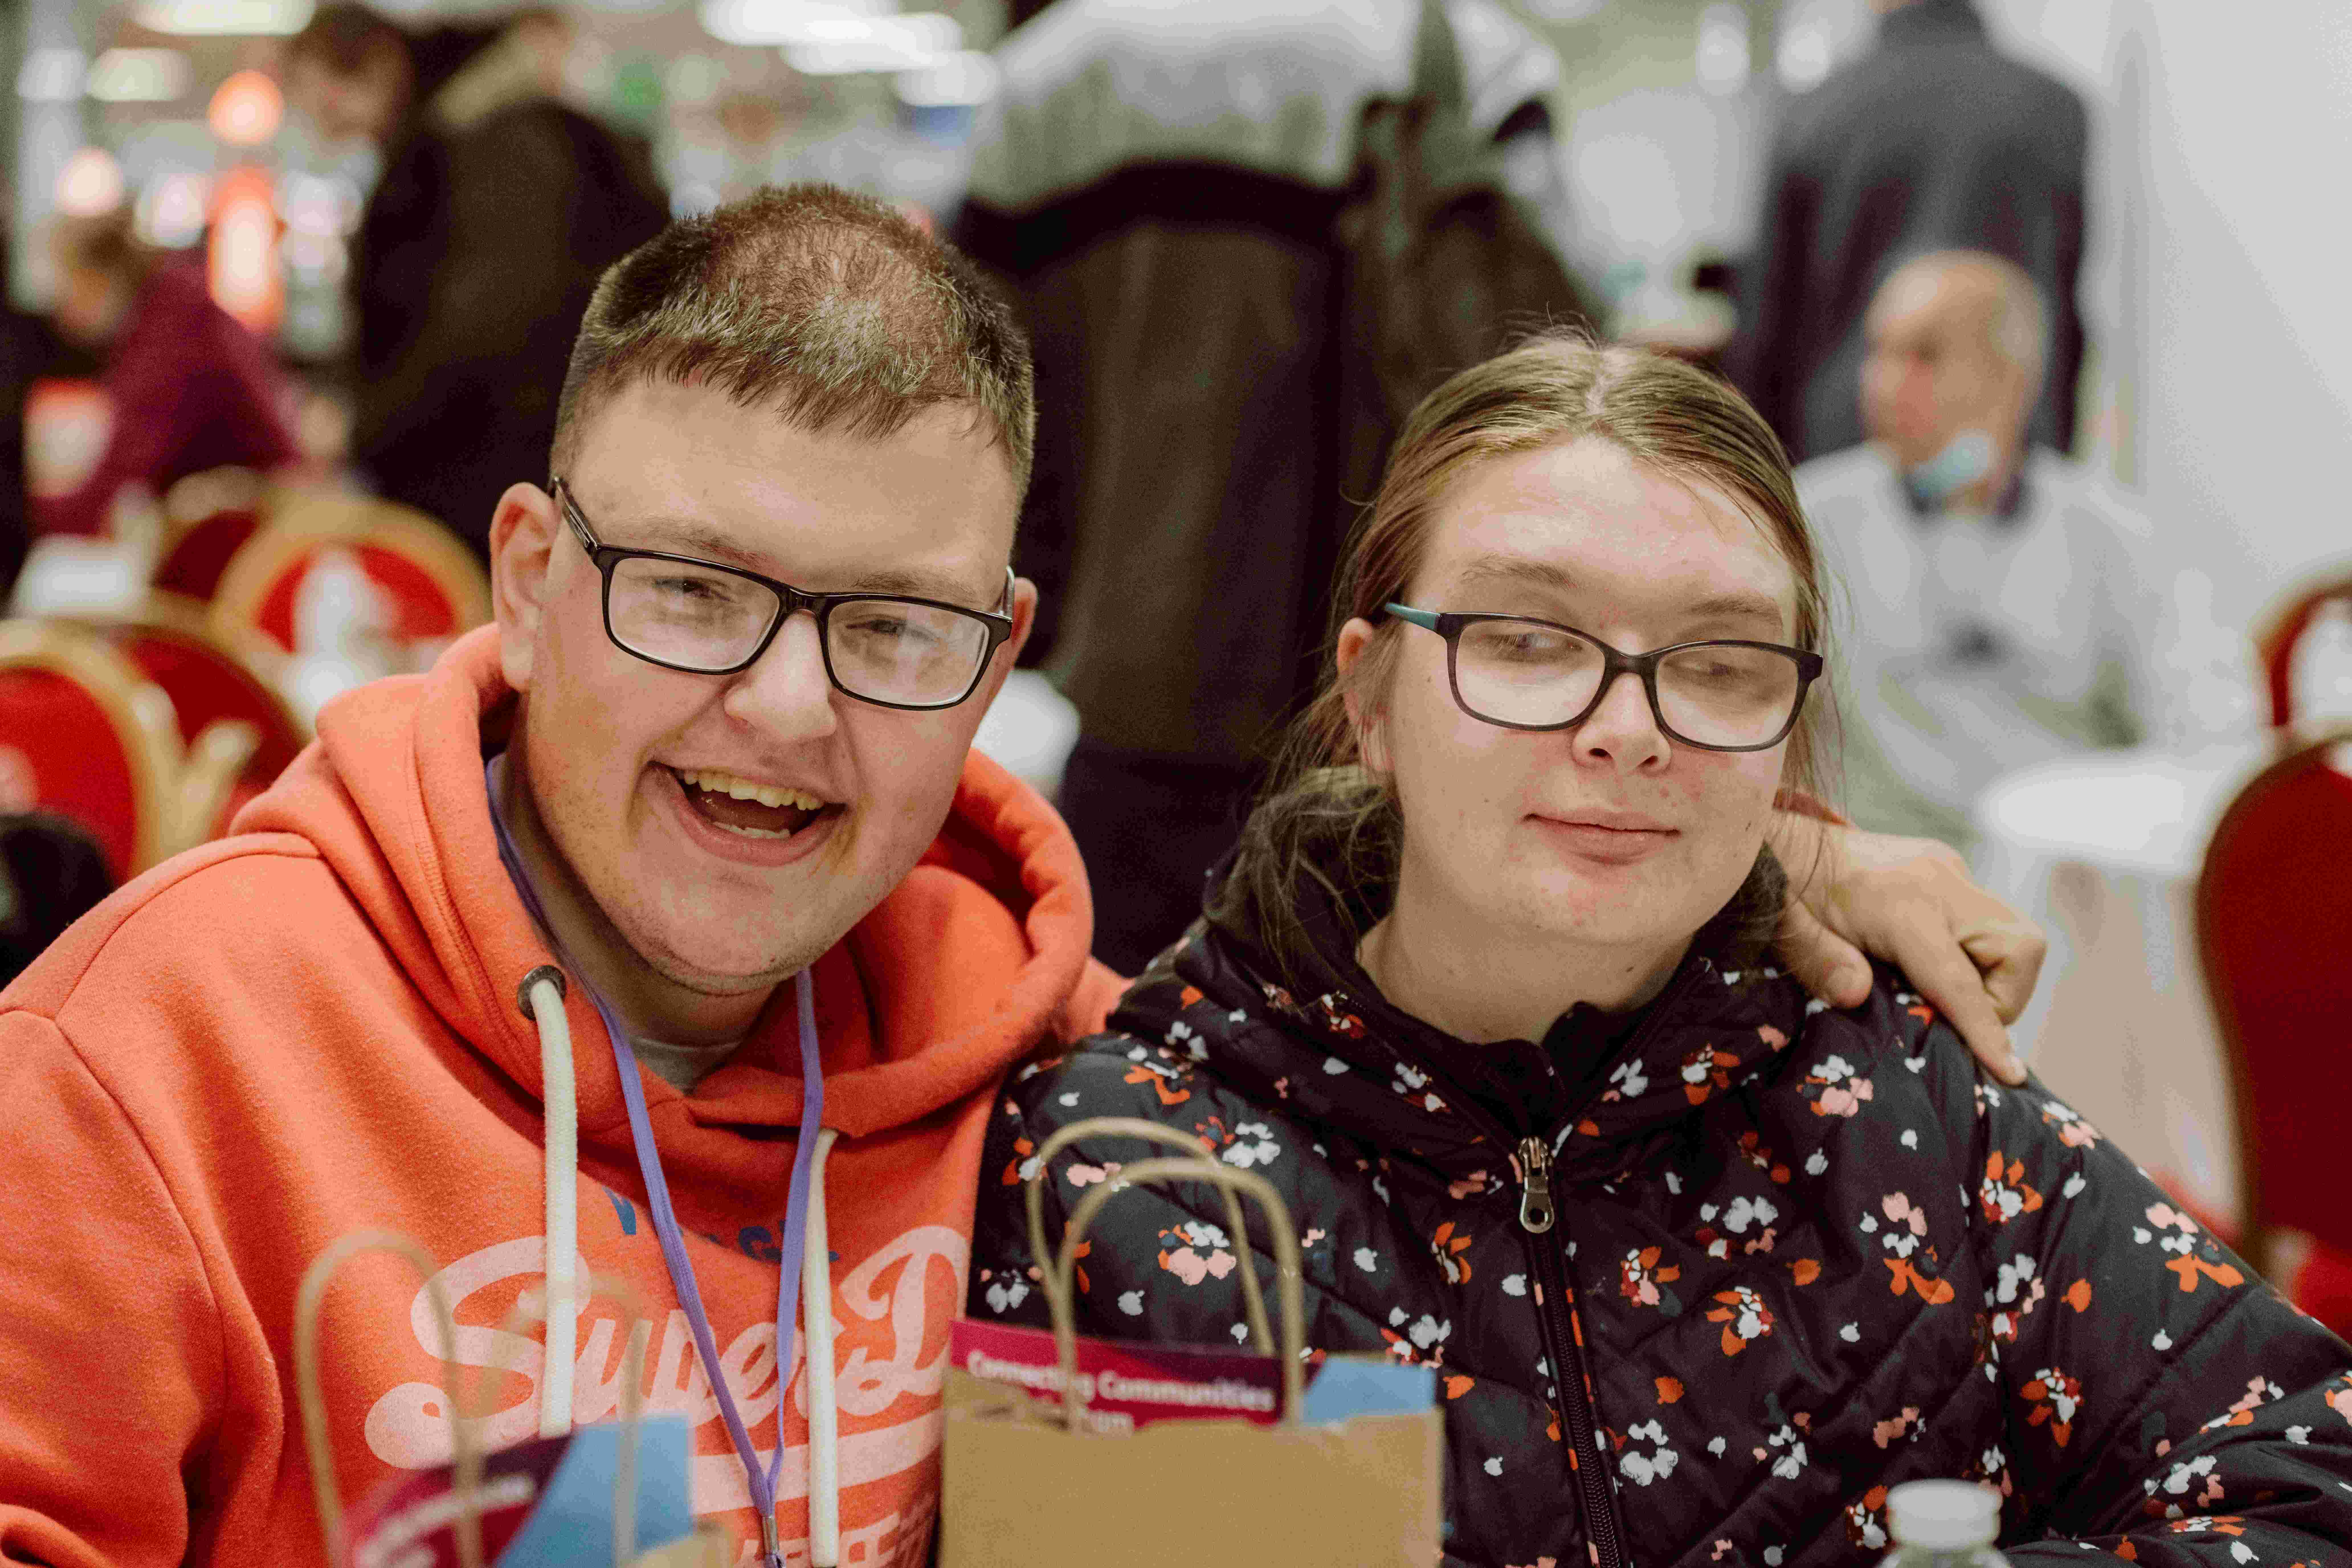 A young man and woman are sat at a table in a community centre smiling at the camera